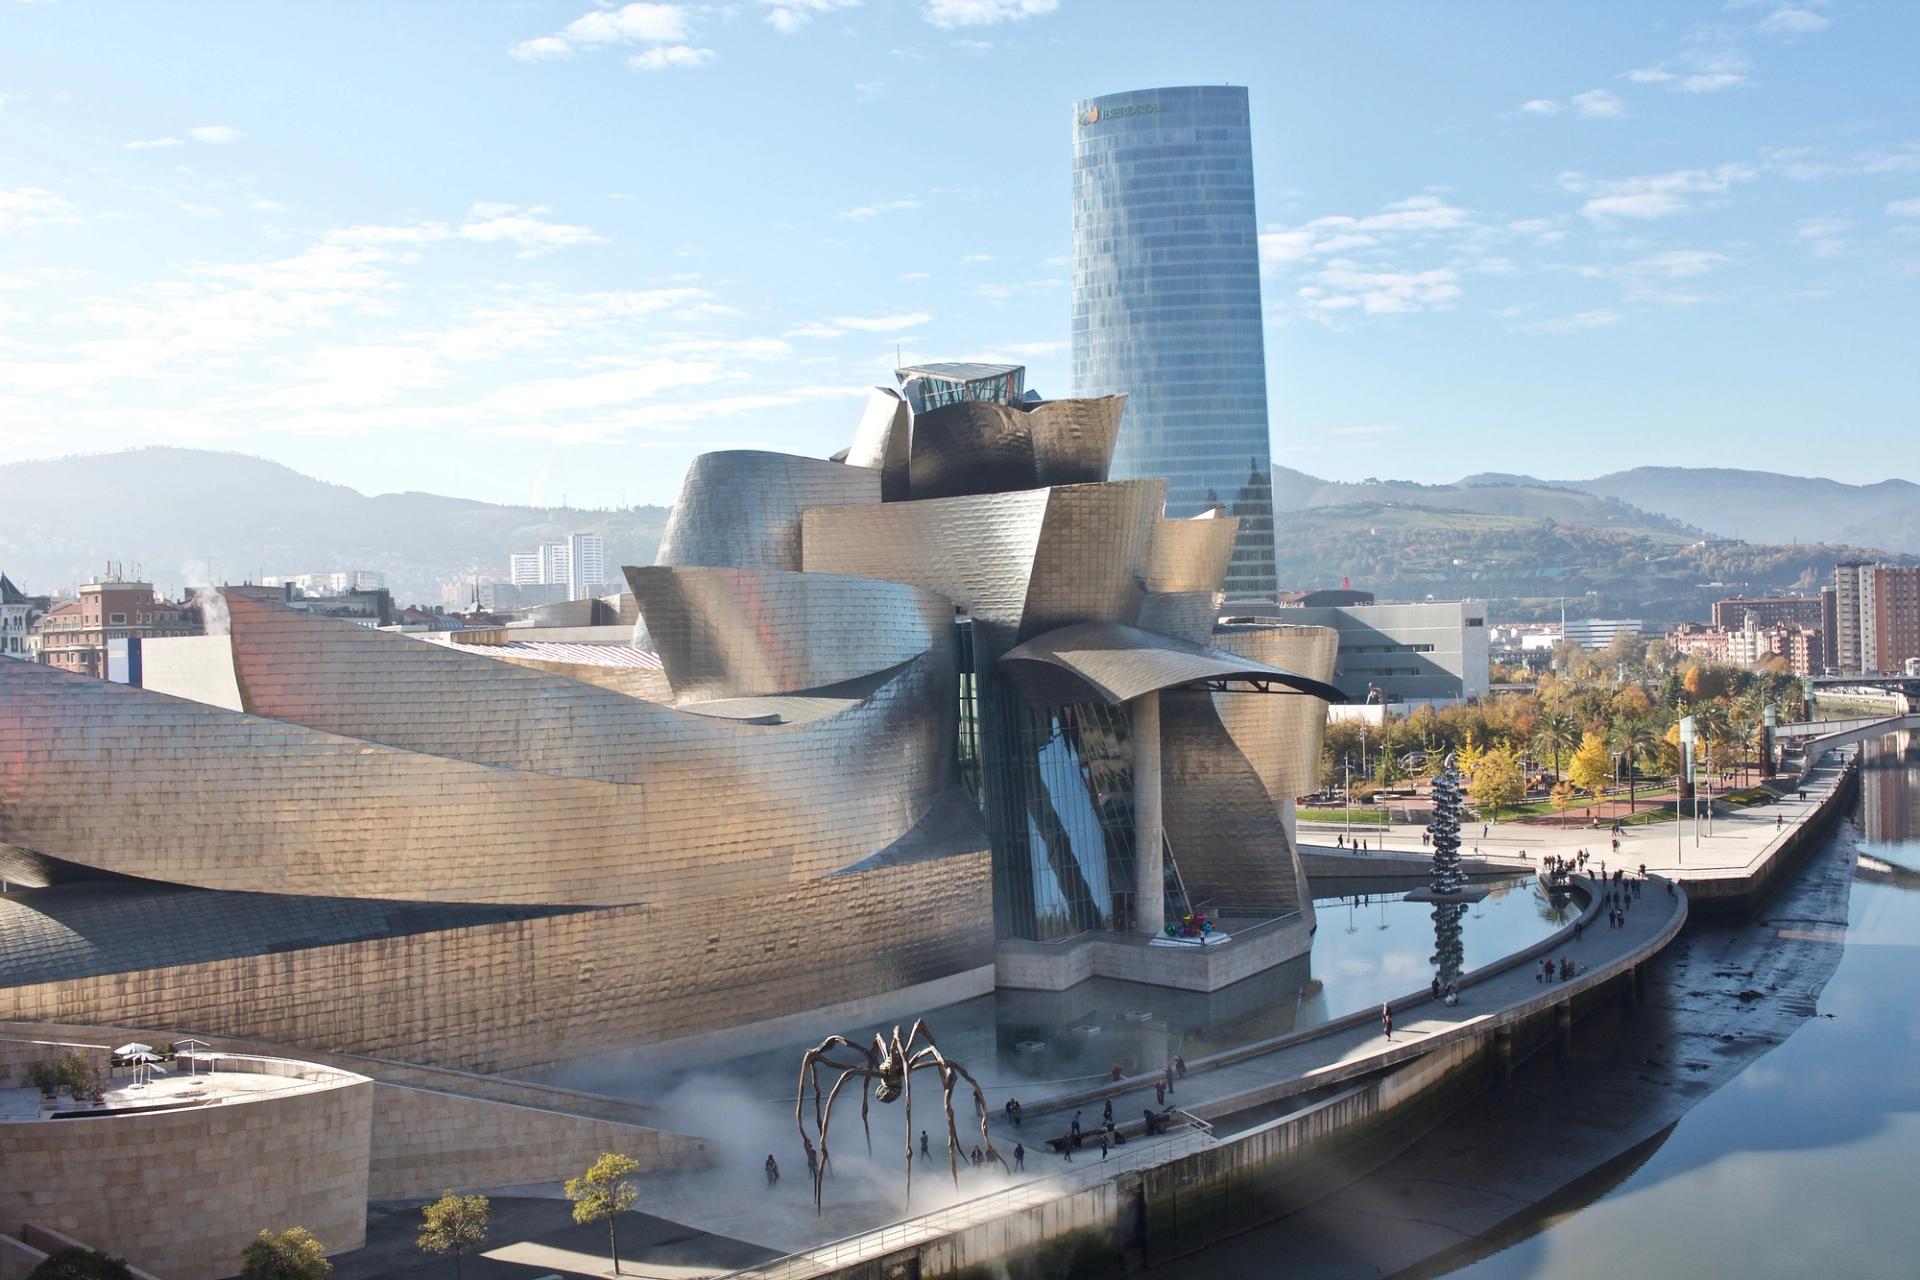 Competing with its contents: the Bilbao museum’s architecture can detract from the art Photo: Naotake Murayama